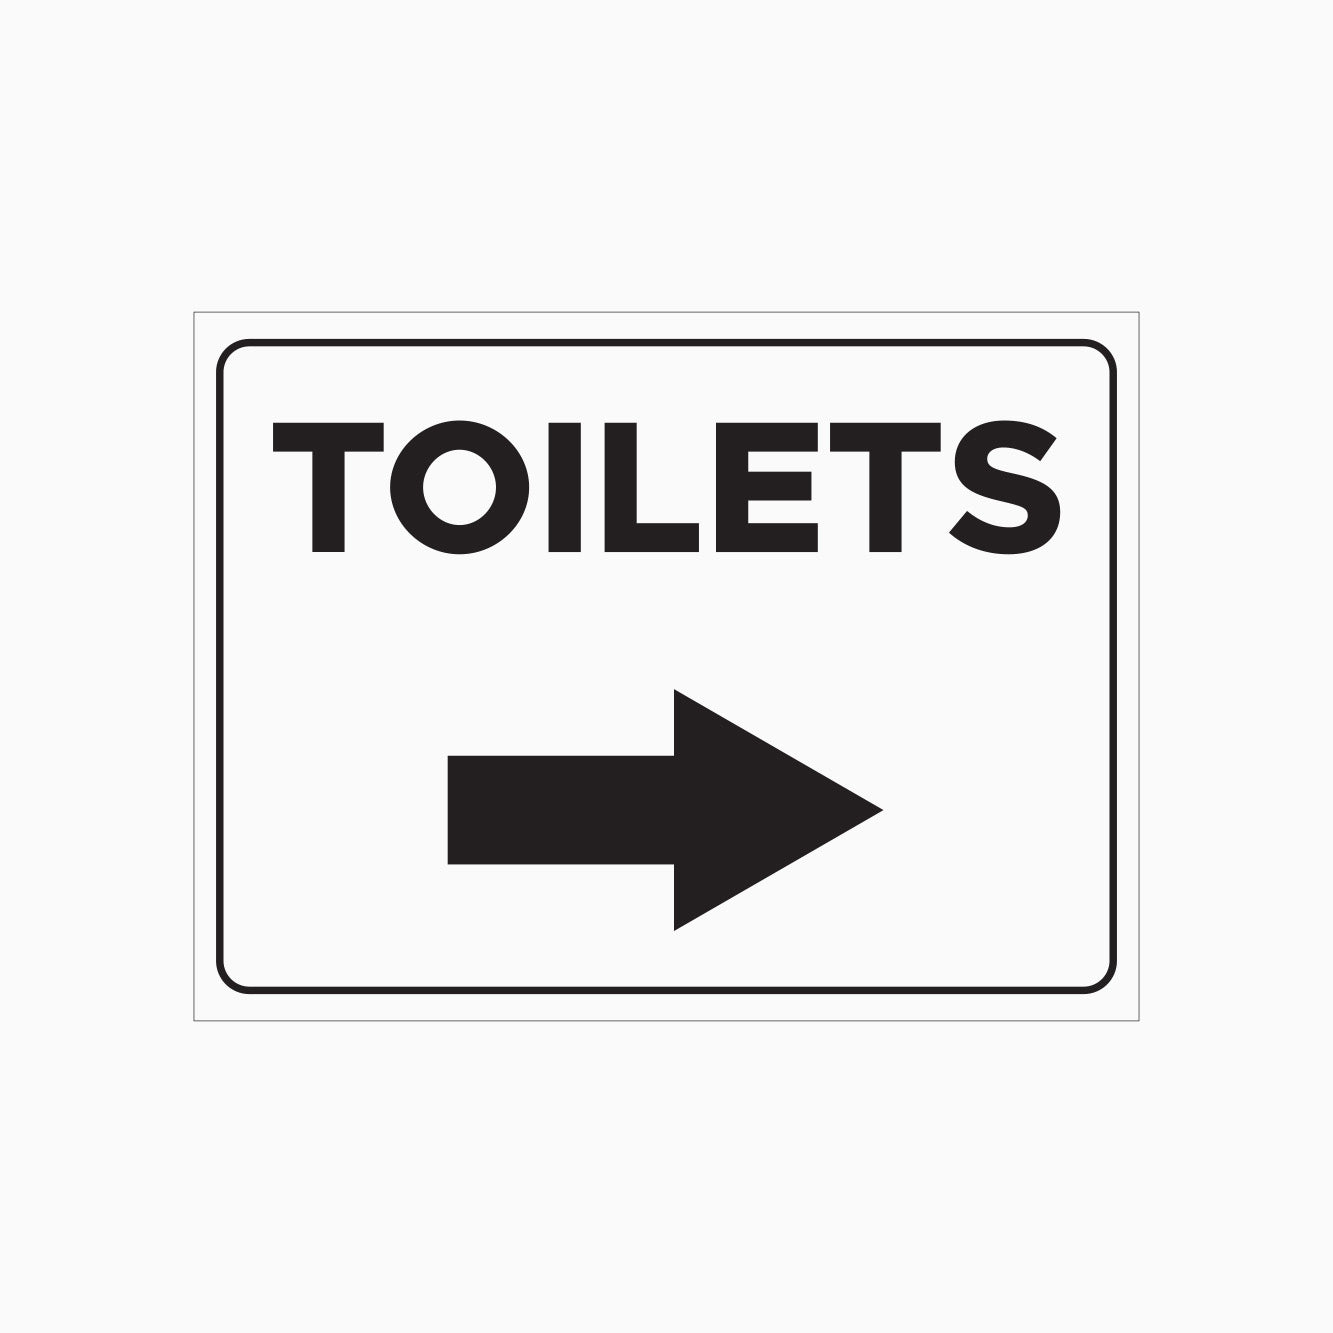 TOILET SIGN - RIGHT POINT